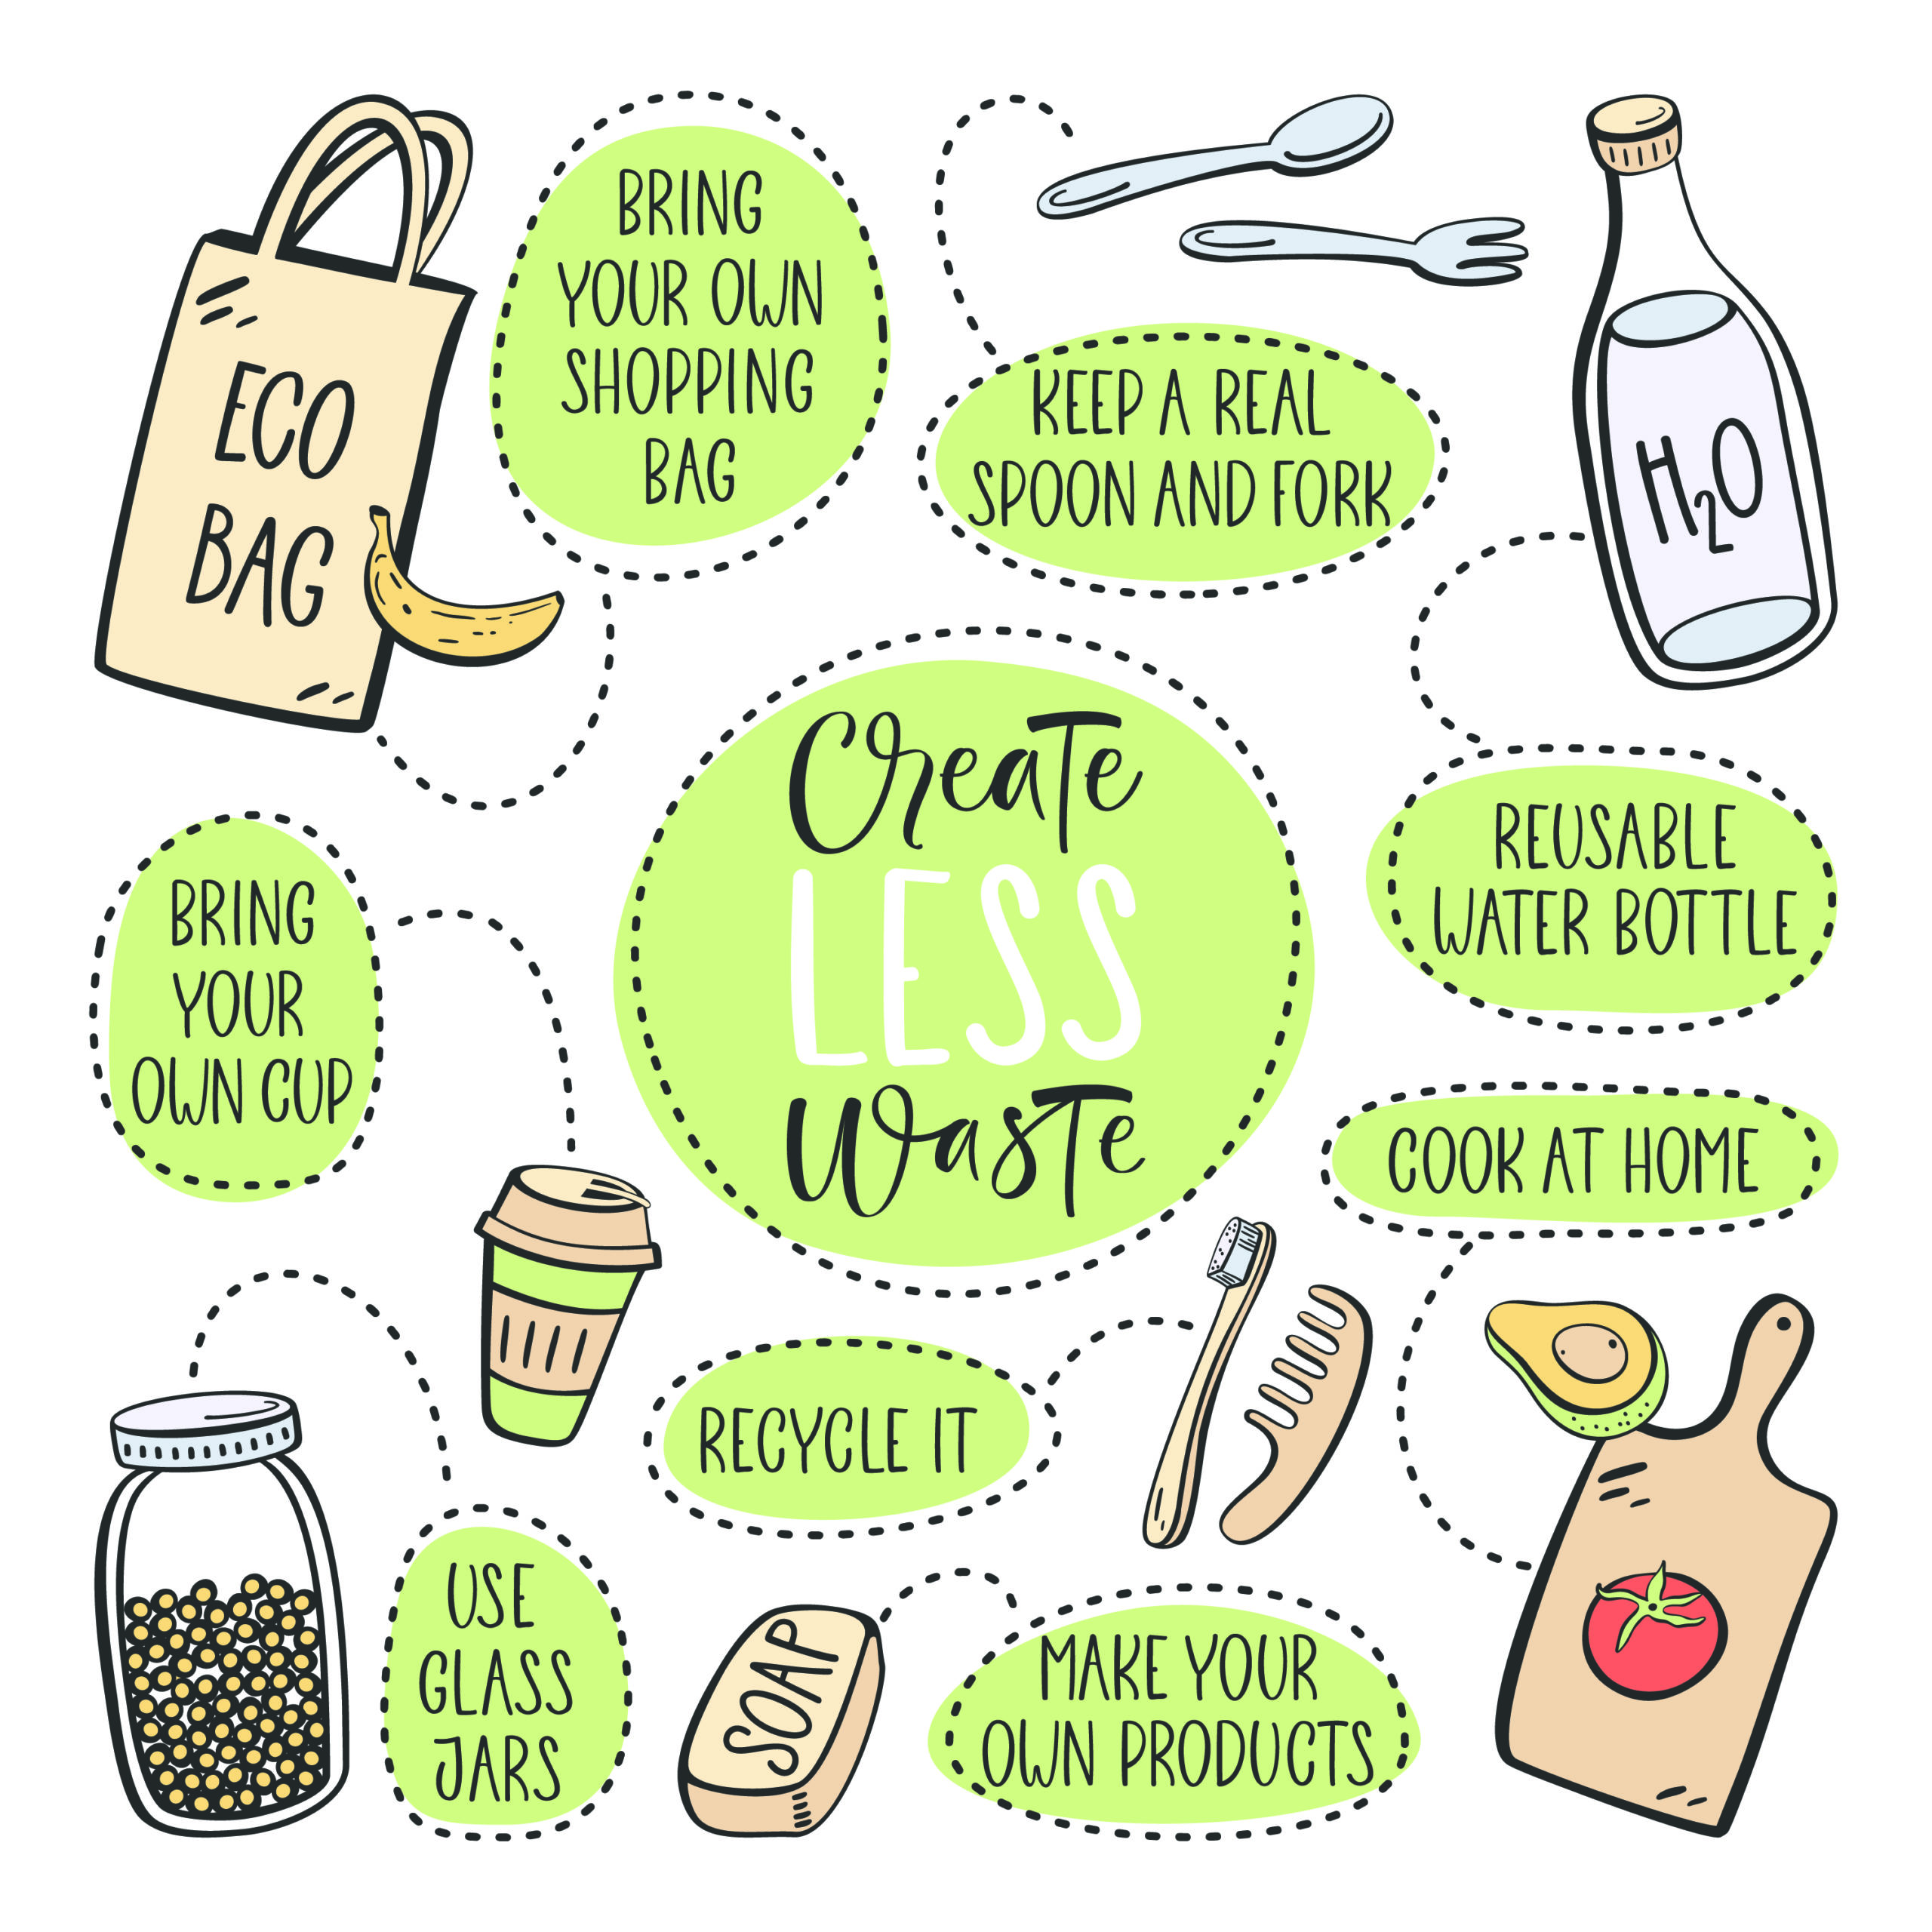 Ways to reduce plastic use in your life